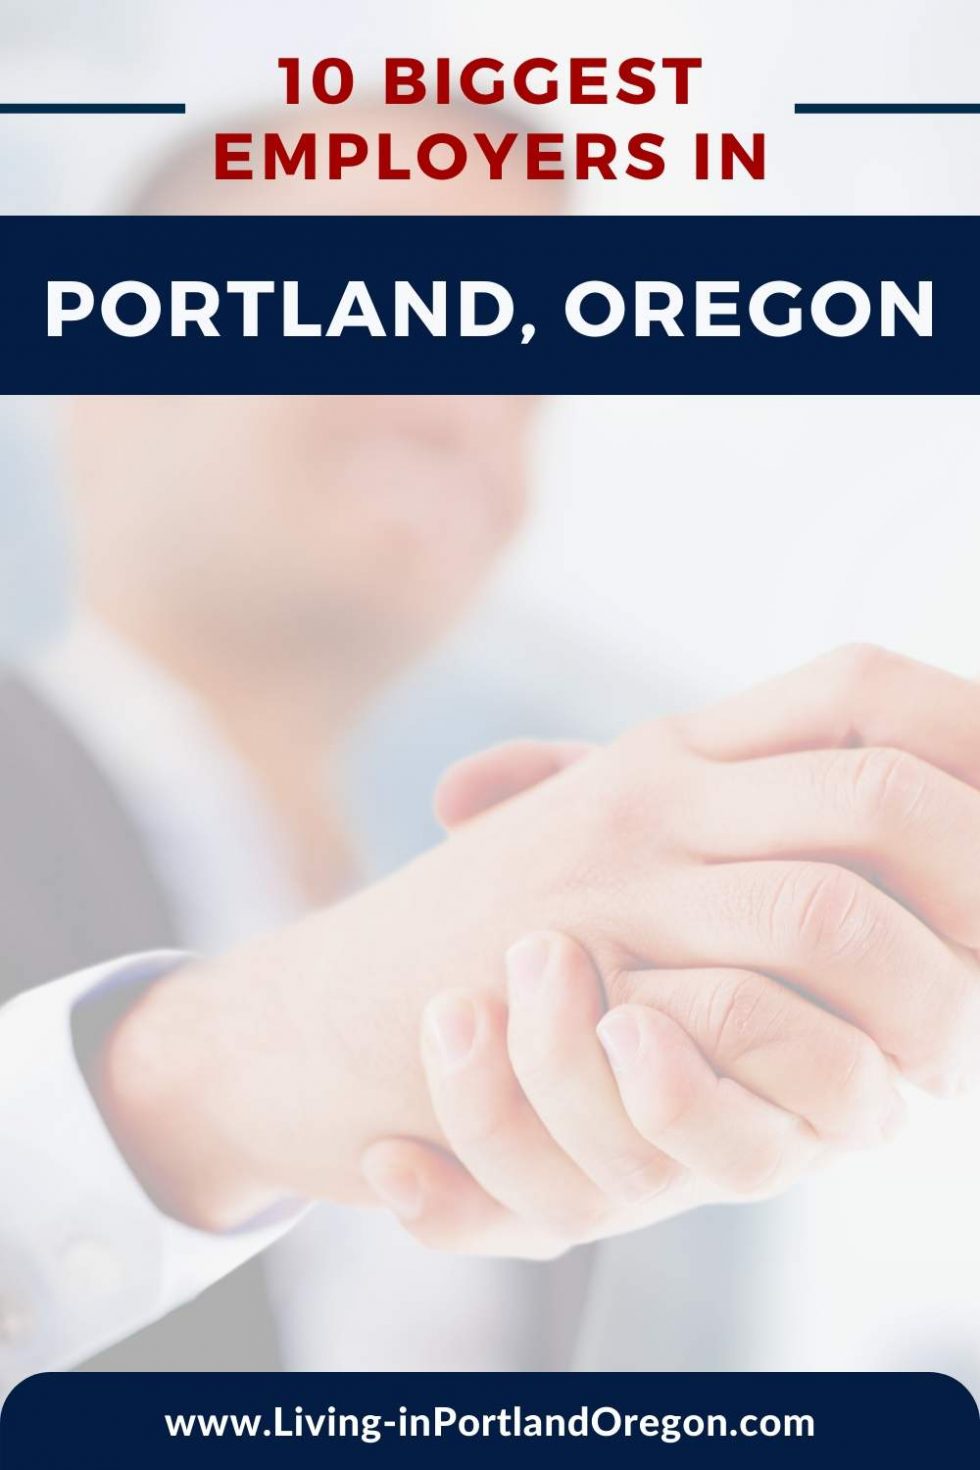 Government contract jobs in portland oregon